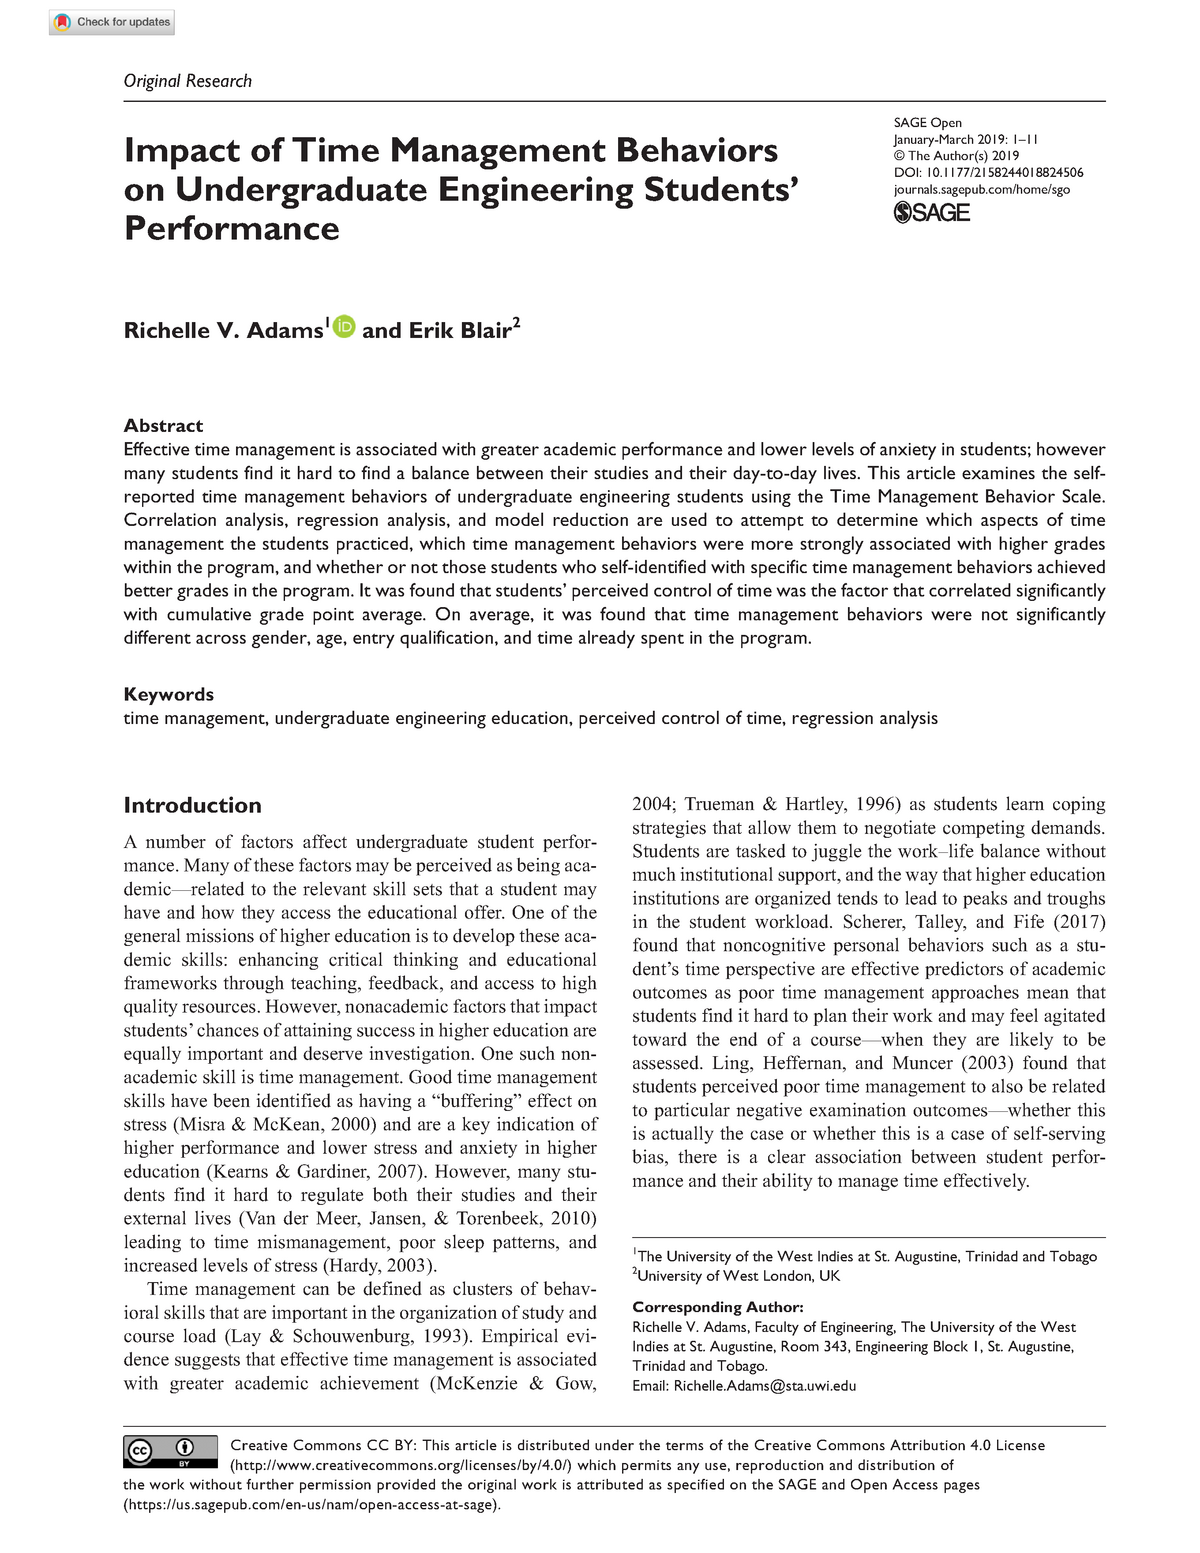 research title about time management of students